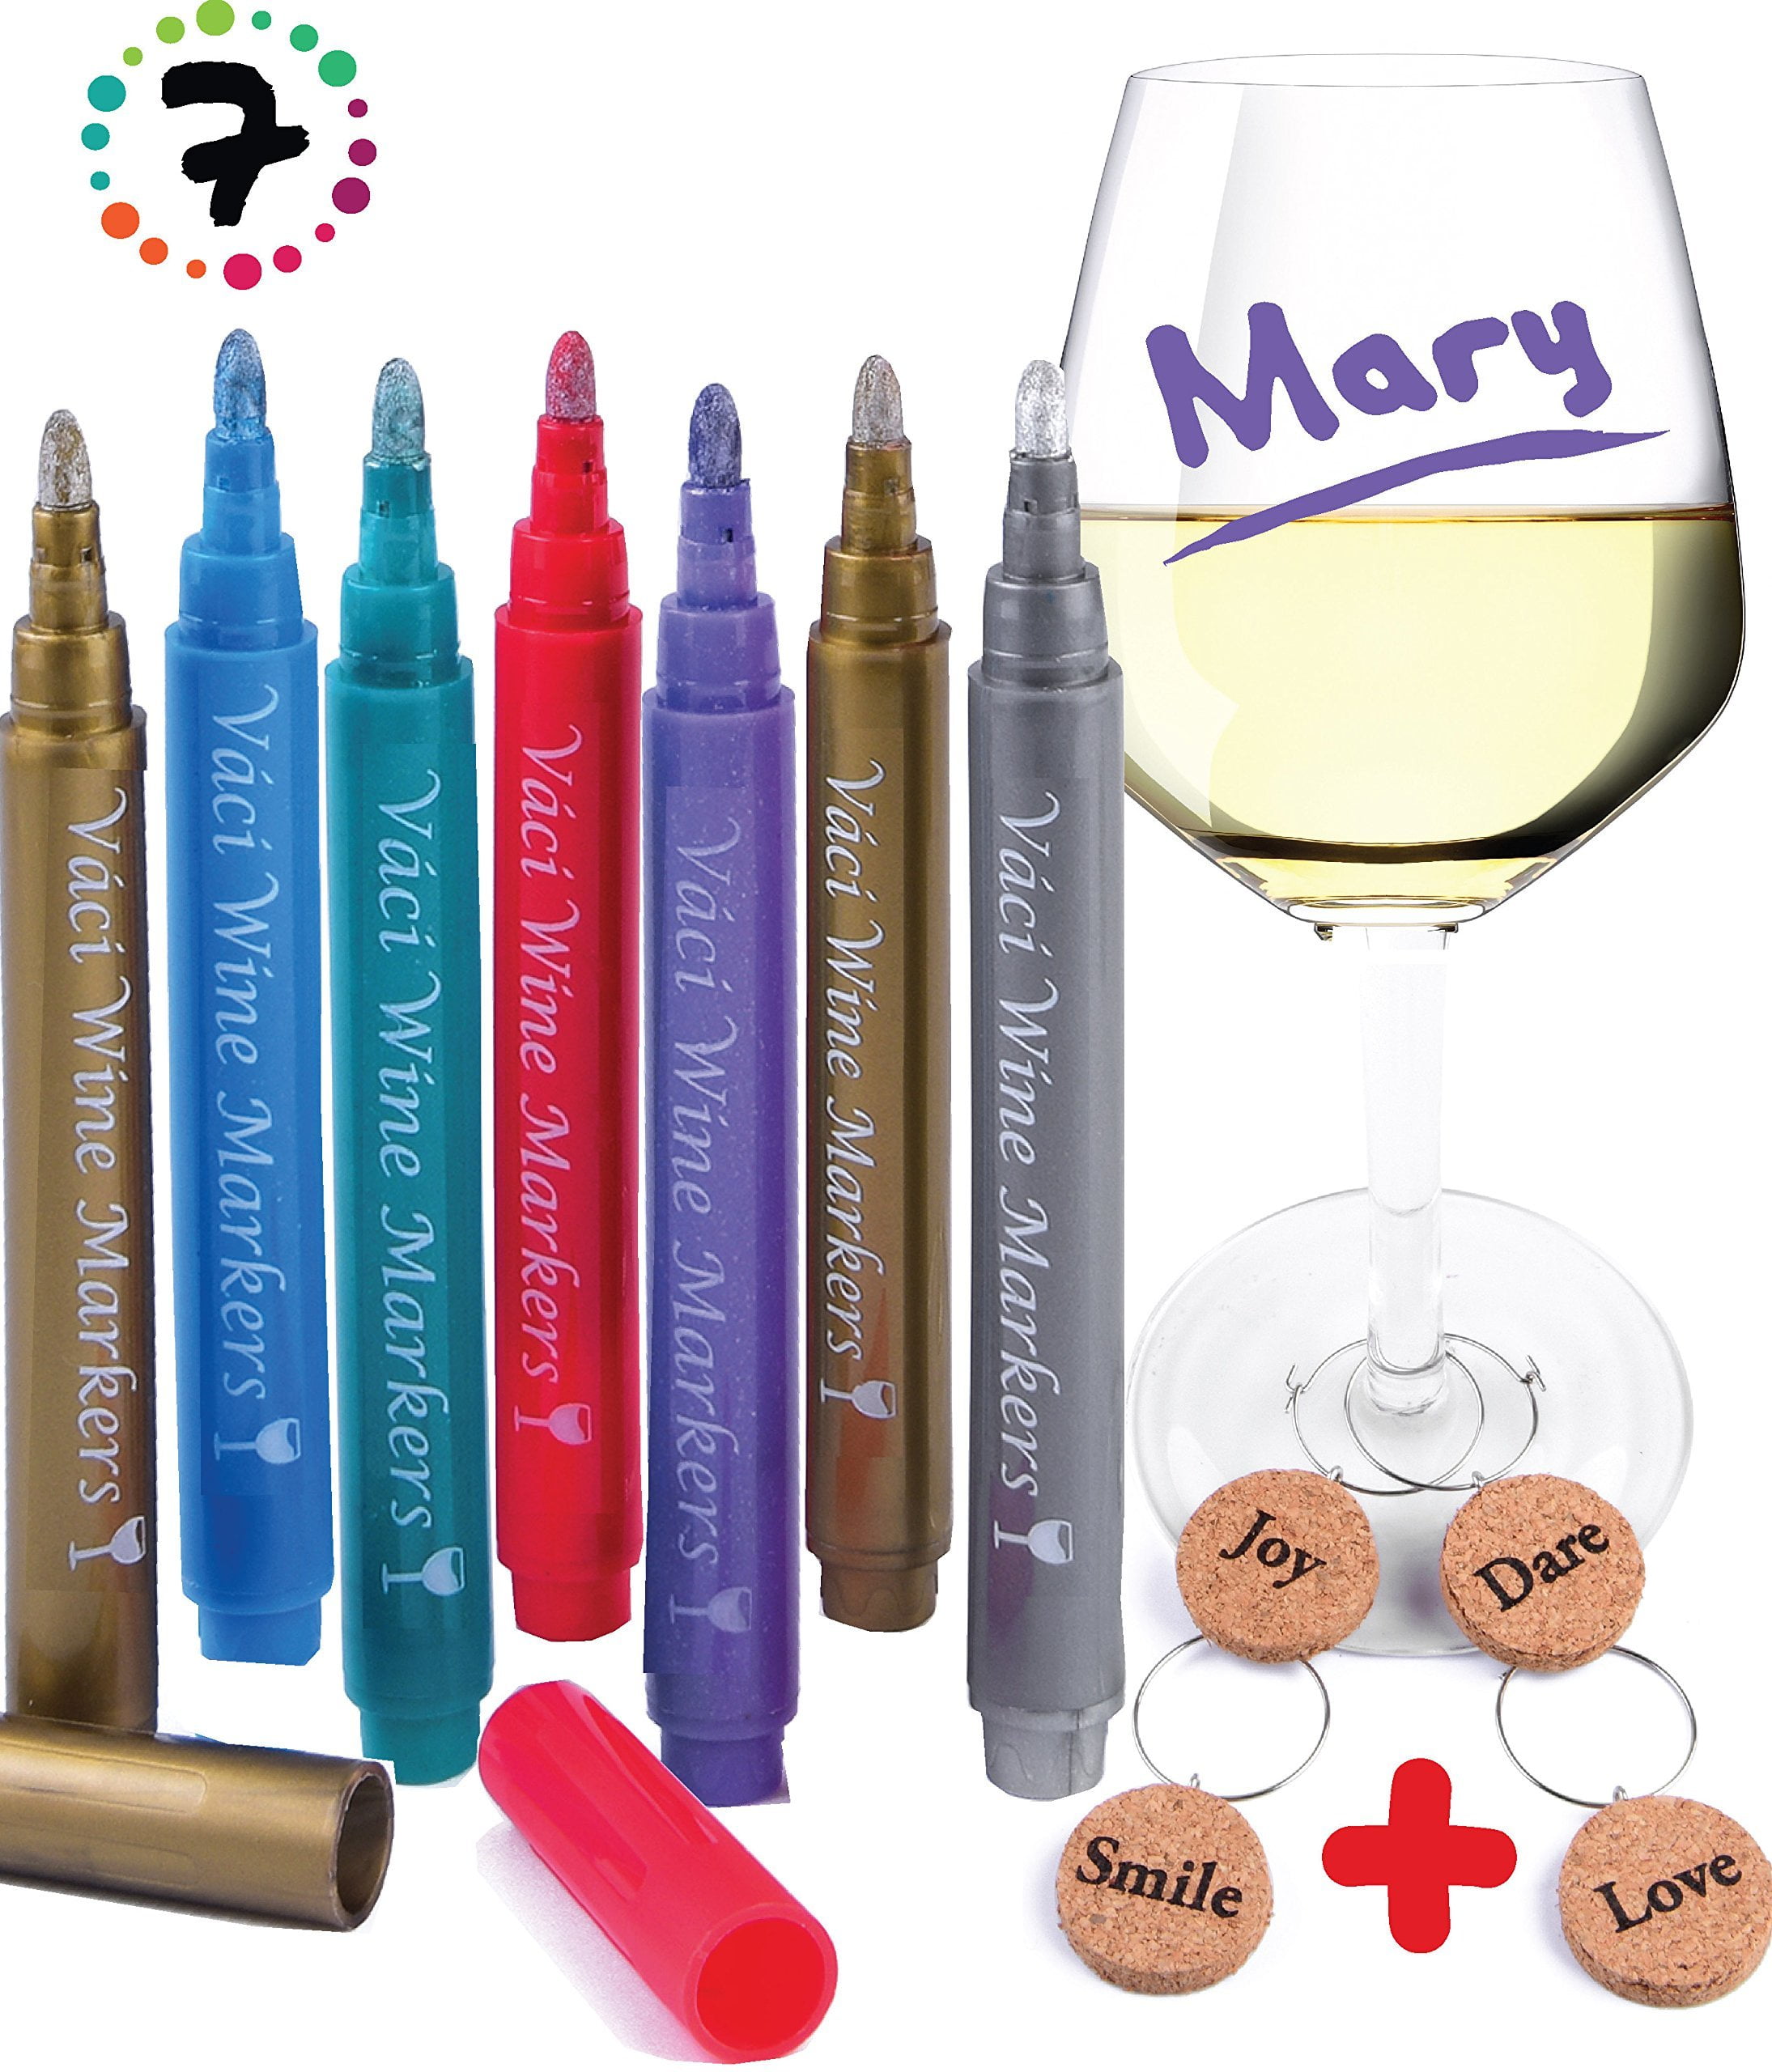 Parker & Bailey Glass Markers - Metallic Markers Wine Glass Markers  Washable Wine Markers for Window Mirror Ceramics Drink Glasses Bottles  Non-Toxic